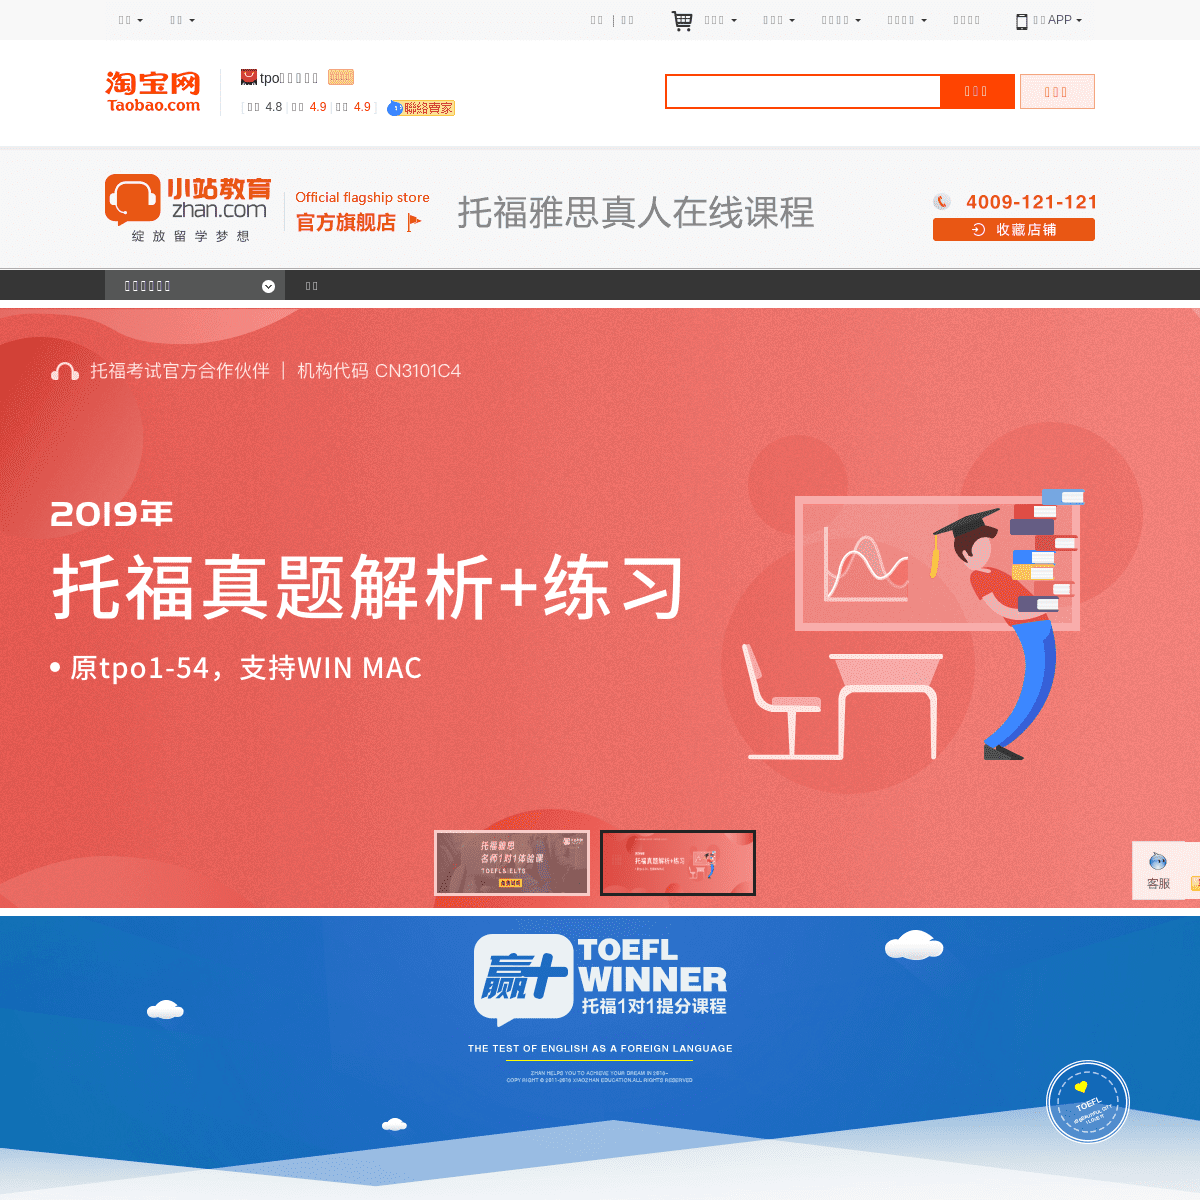 A complete backup of tpoxiaozhan.tmall.com